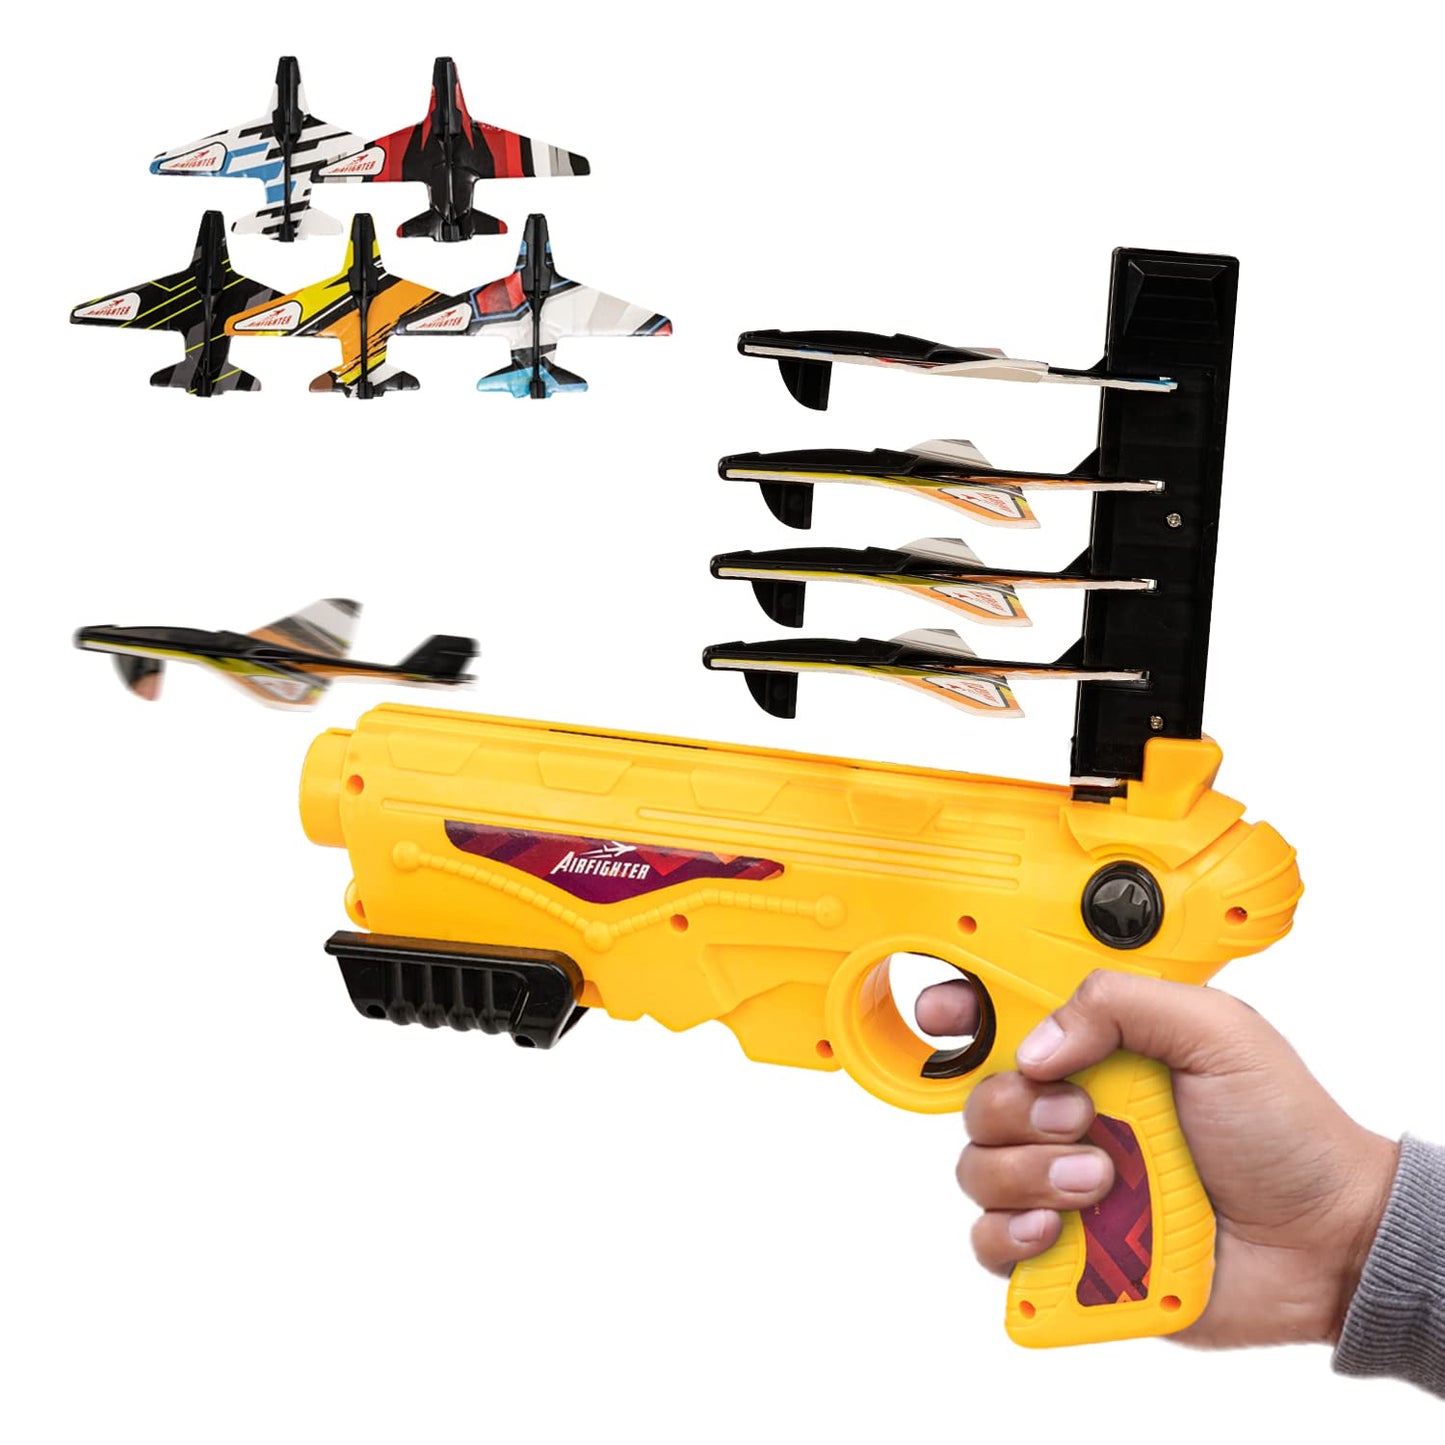 Baybee Airplane Launcher Toy Catapult Plane Gun with Foam Aircrafts Glider for Kids